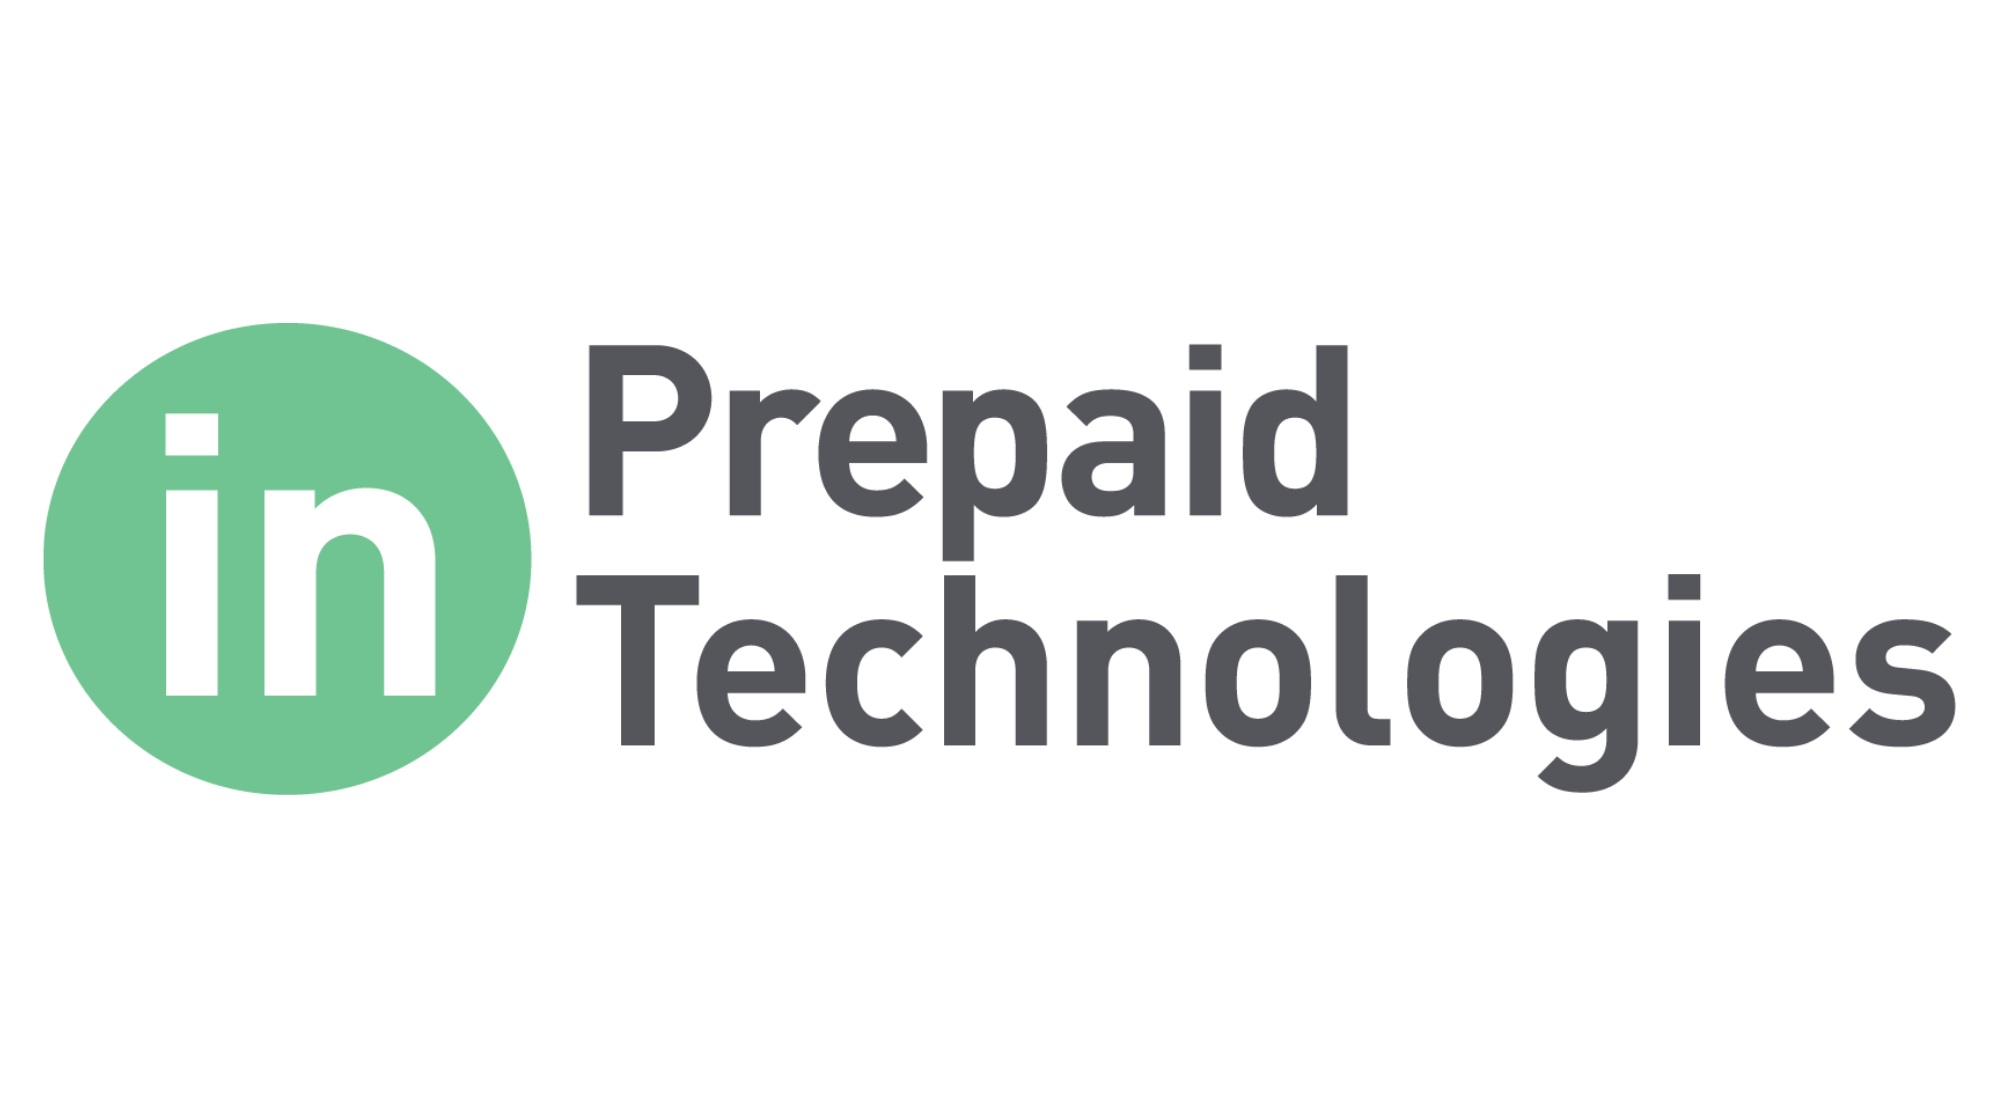 Prepaid Technologies Secures $96 Million Growth Round Led by Edison Partners